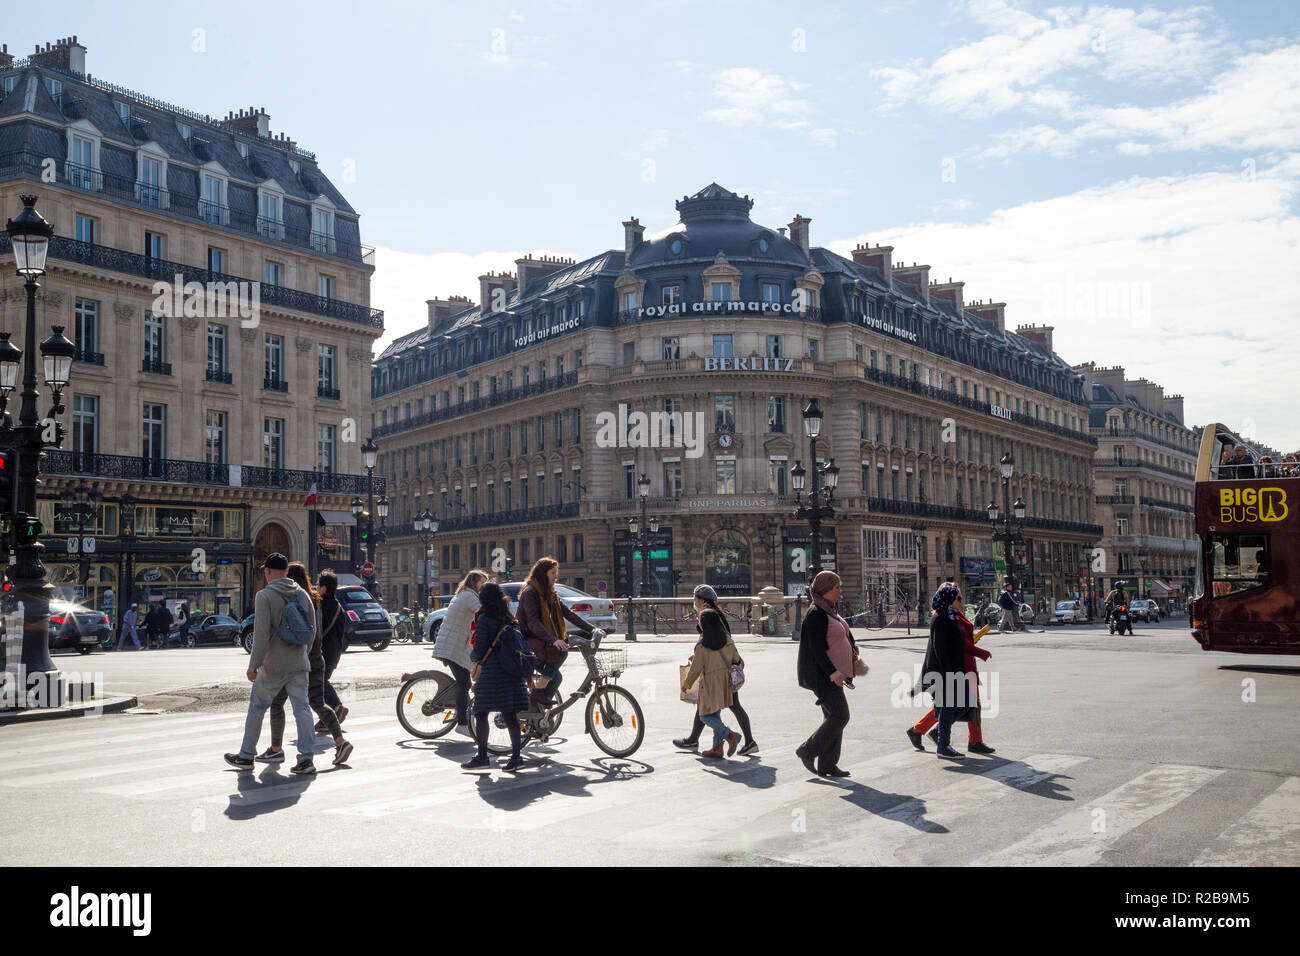 Paris/France - April 22nd 2017: busy street crossing Stock Photo